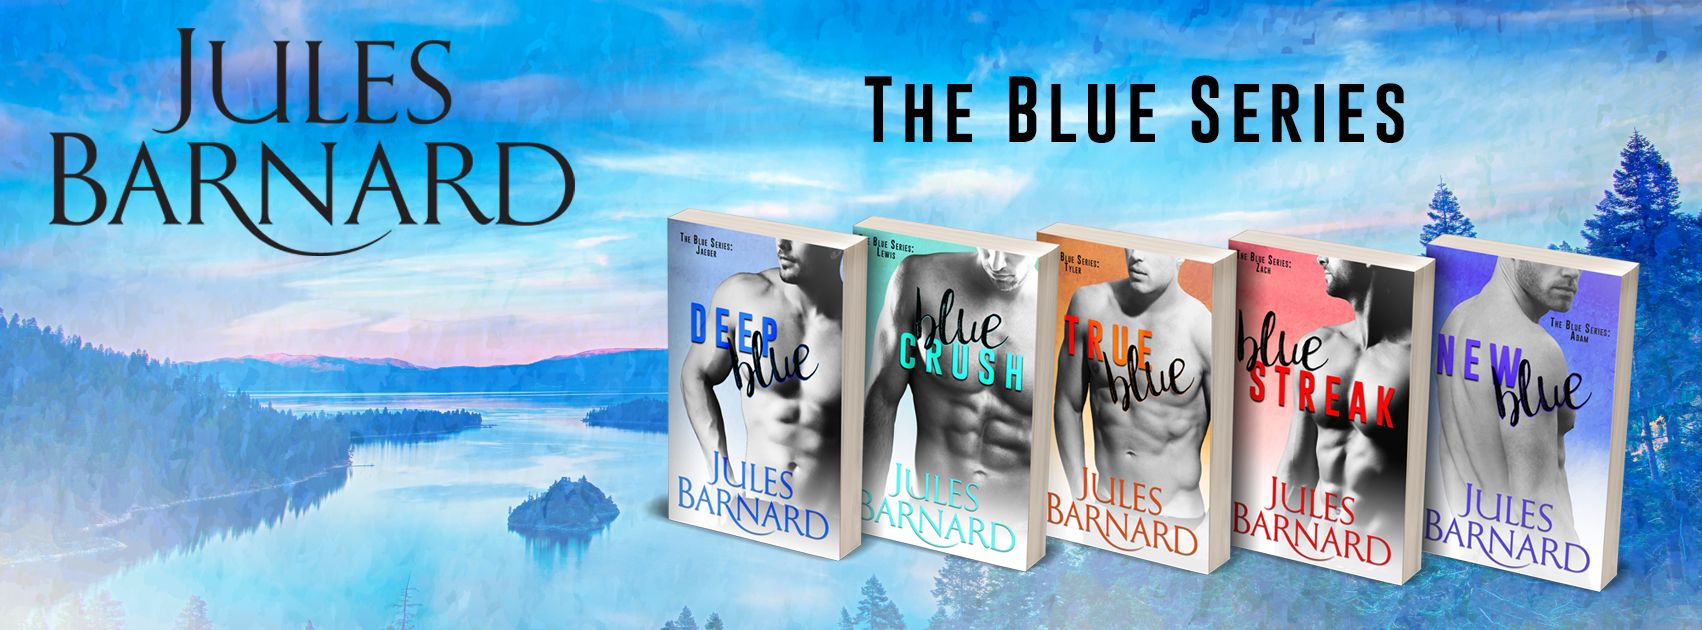 The-Blue-Series-FB-Banner.png